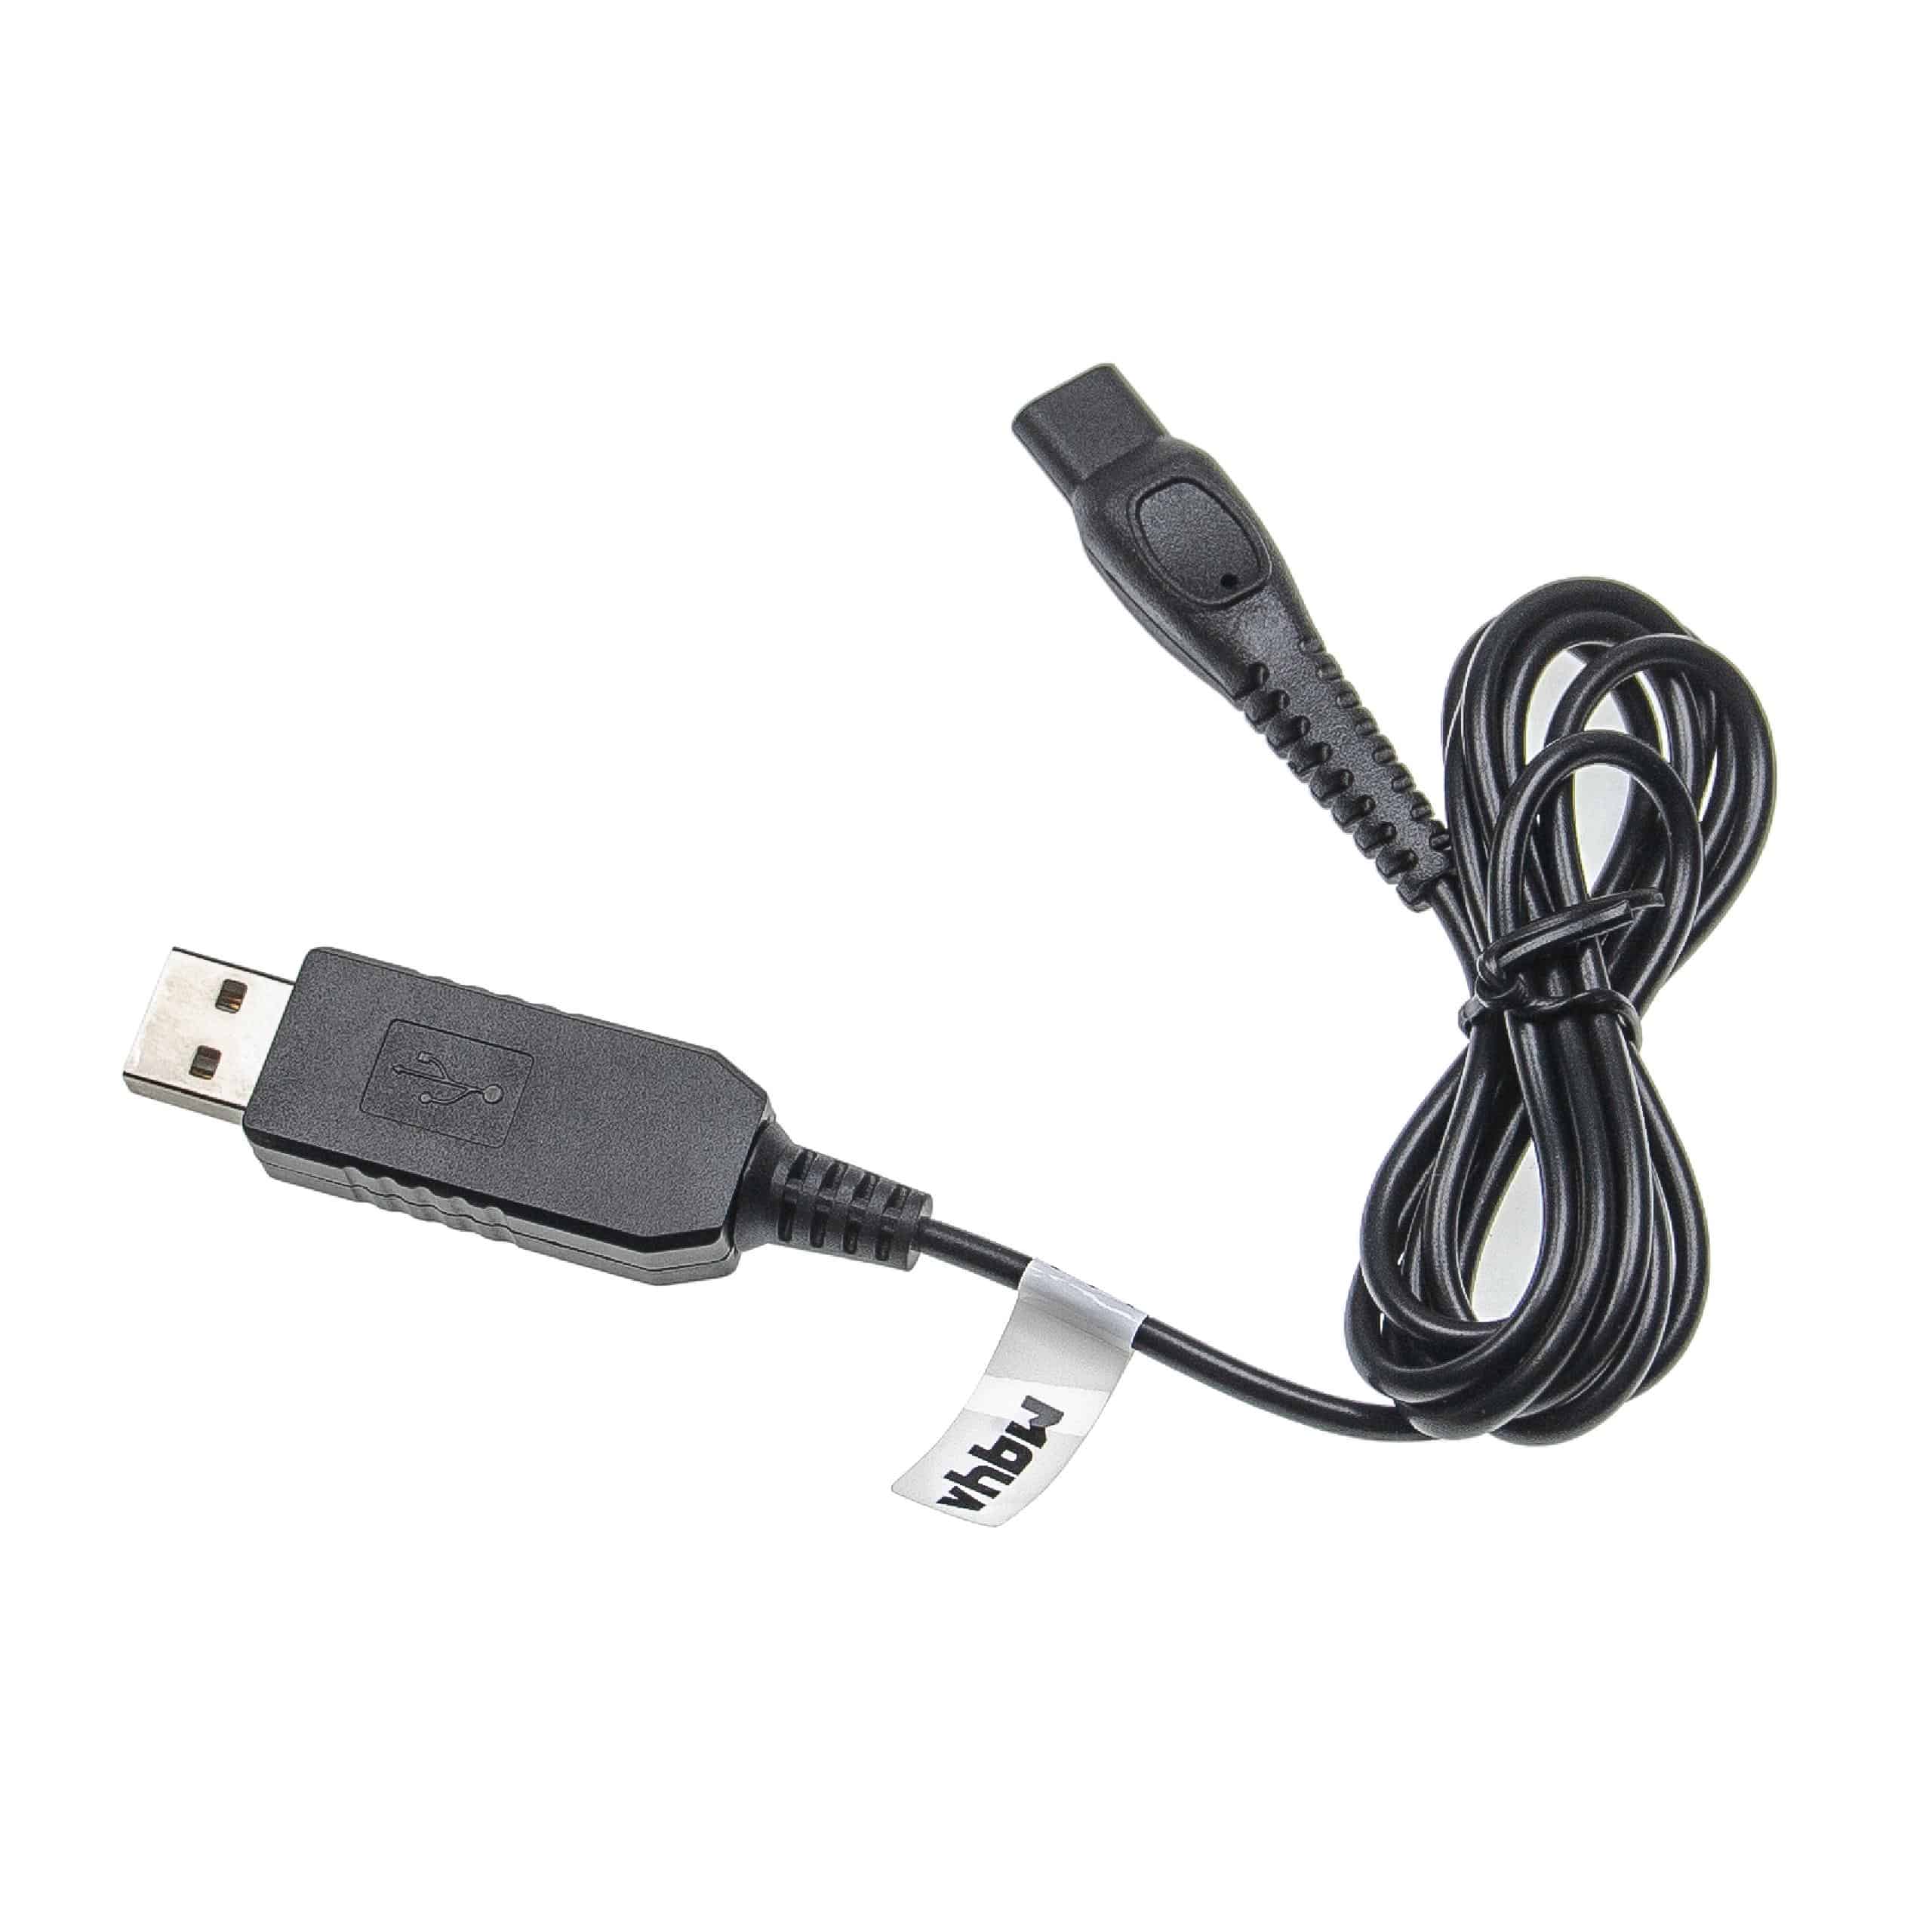 USB Charging Cable suitable for HS8020 Philips HS8020 Shaver - 100 cm